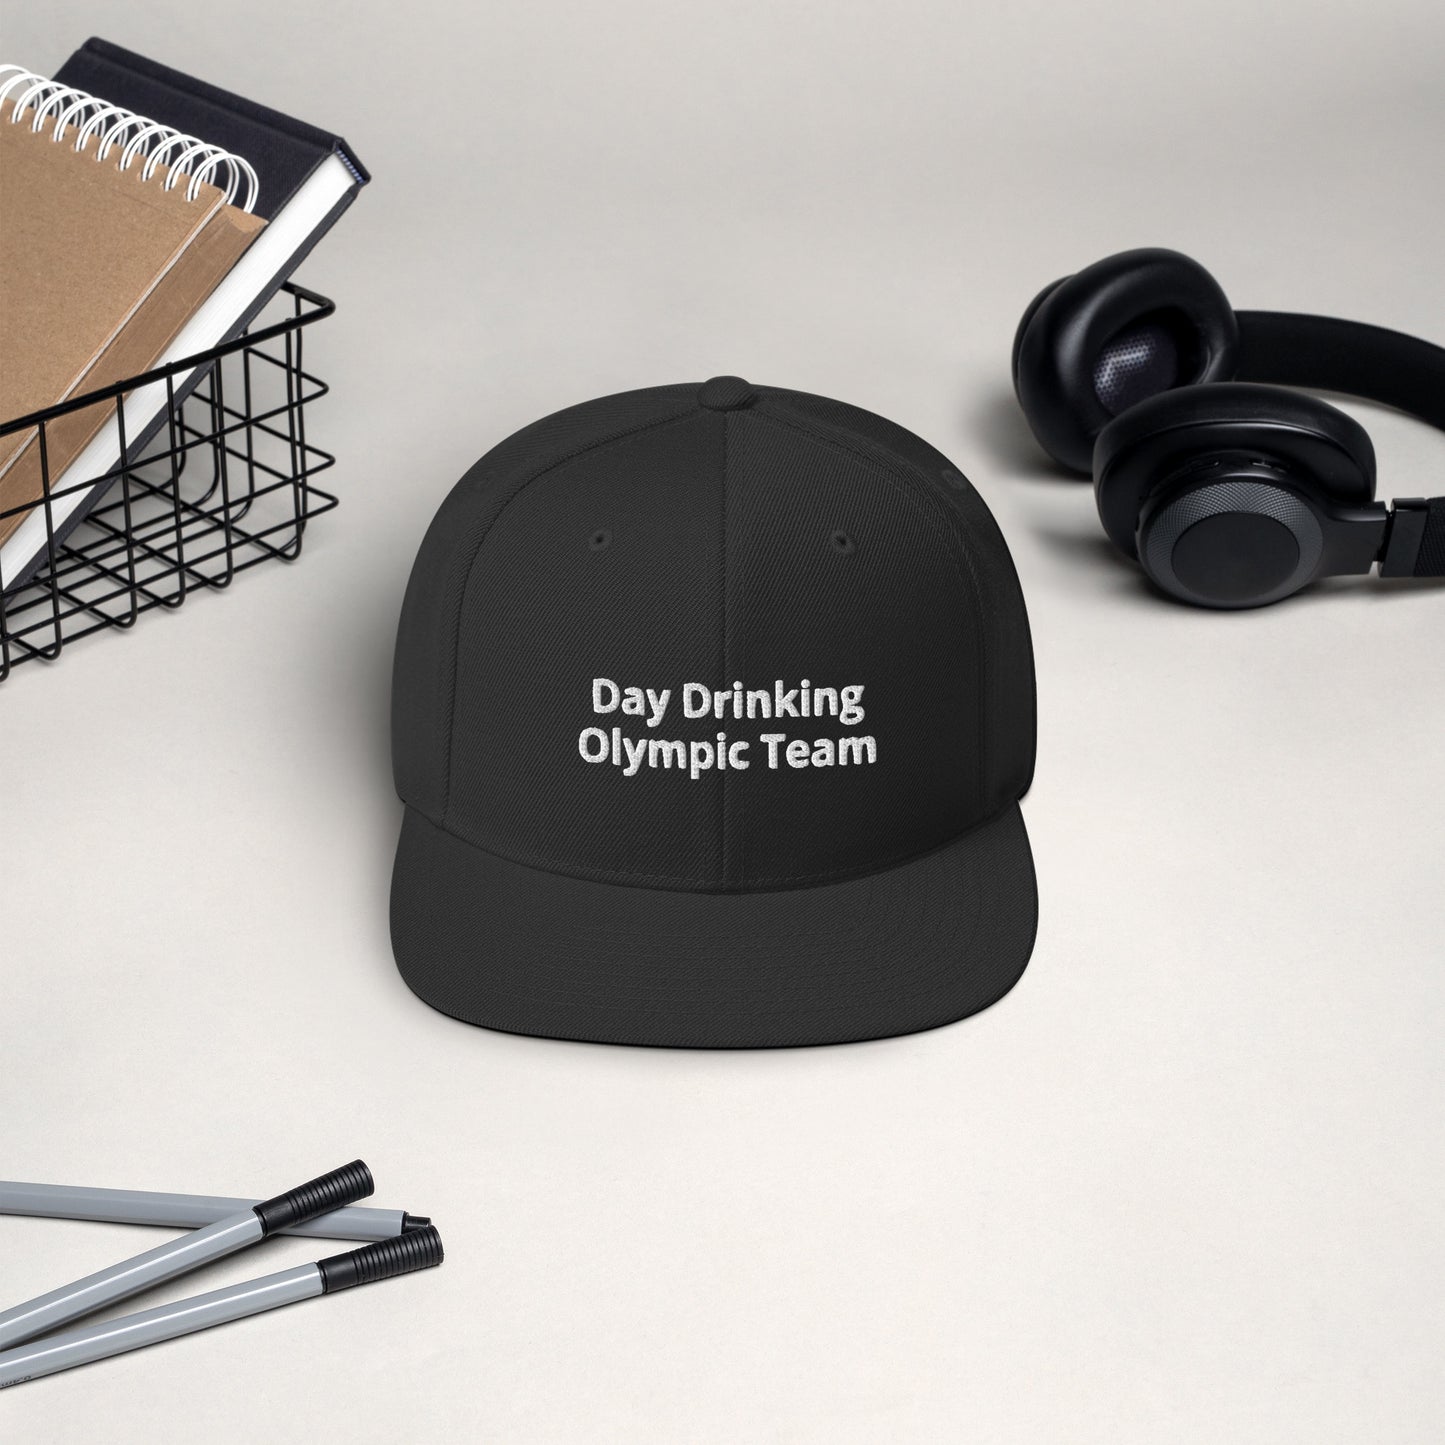 Day Drinking Olympic Team - Snapback Hat